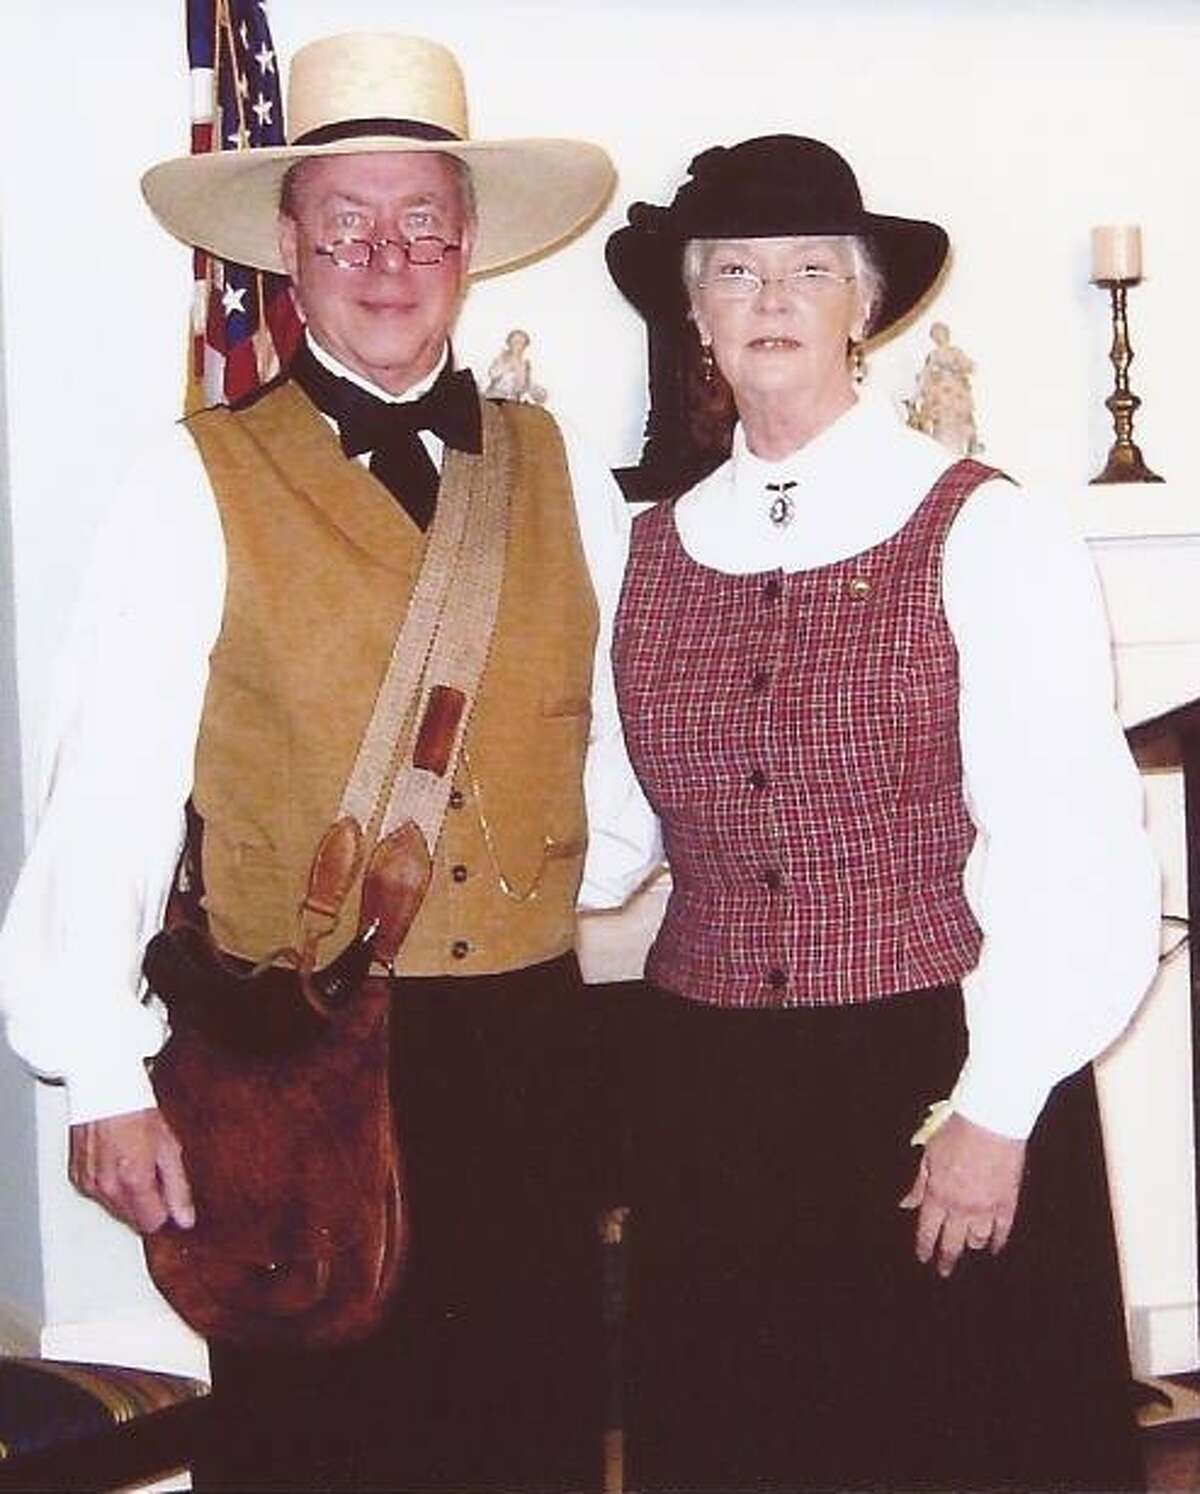 Eric and Glenda Sandifer of Baytown will bring the characters of Frank and Cynthia Hardin to life on Oct. 26-27 for tours being conducted by the Liberty County Historical Society.